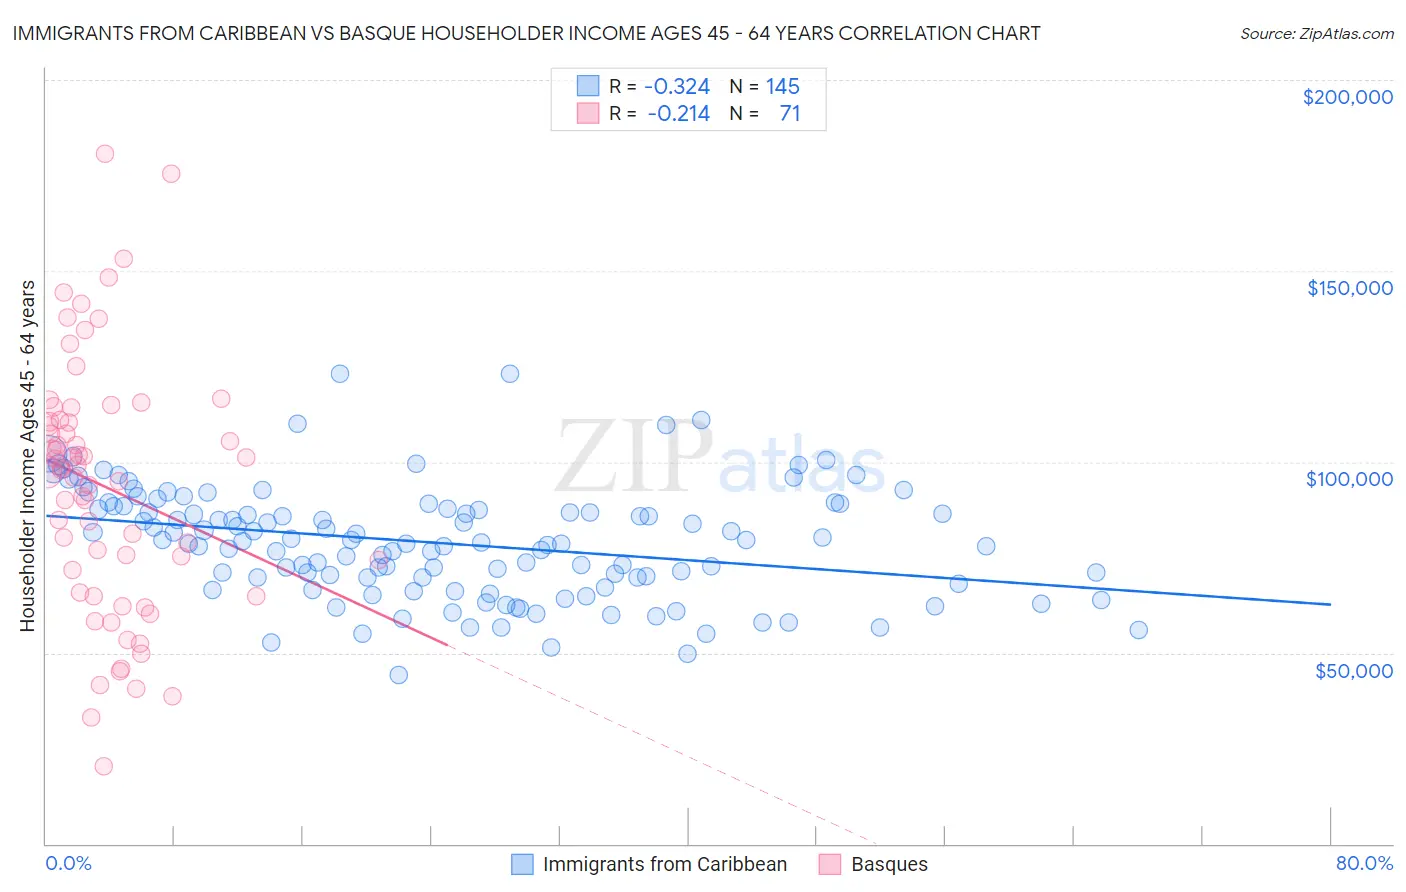 Immigrants from Caribbean vs Basque Householder Income Ages 45 - 64 years